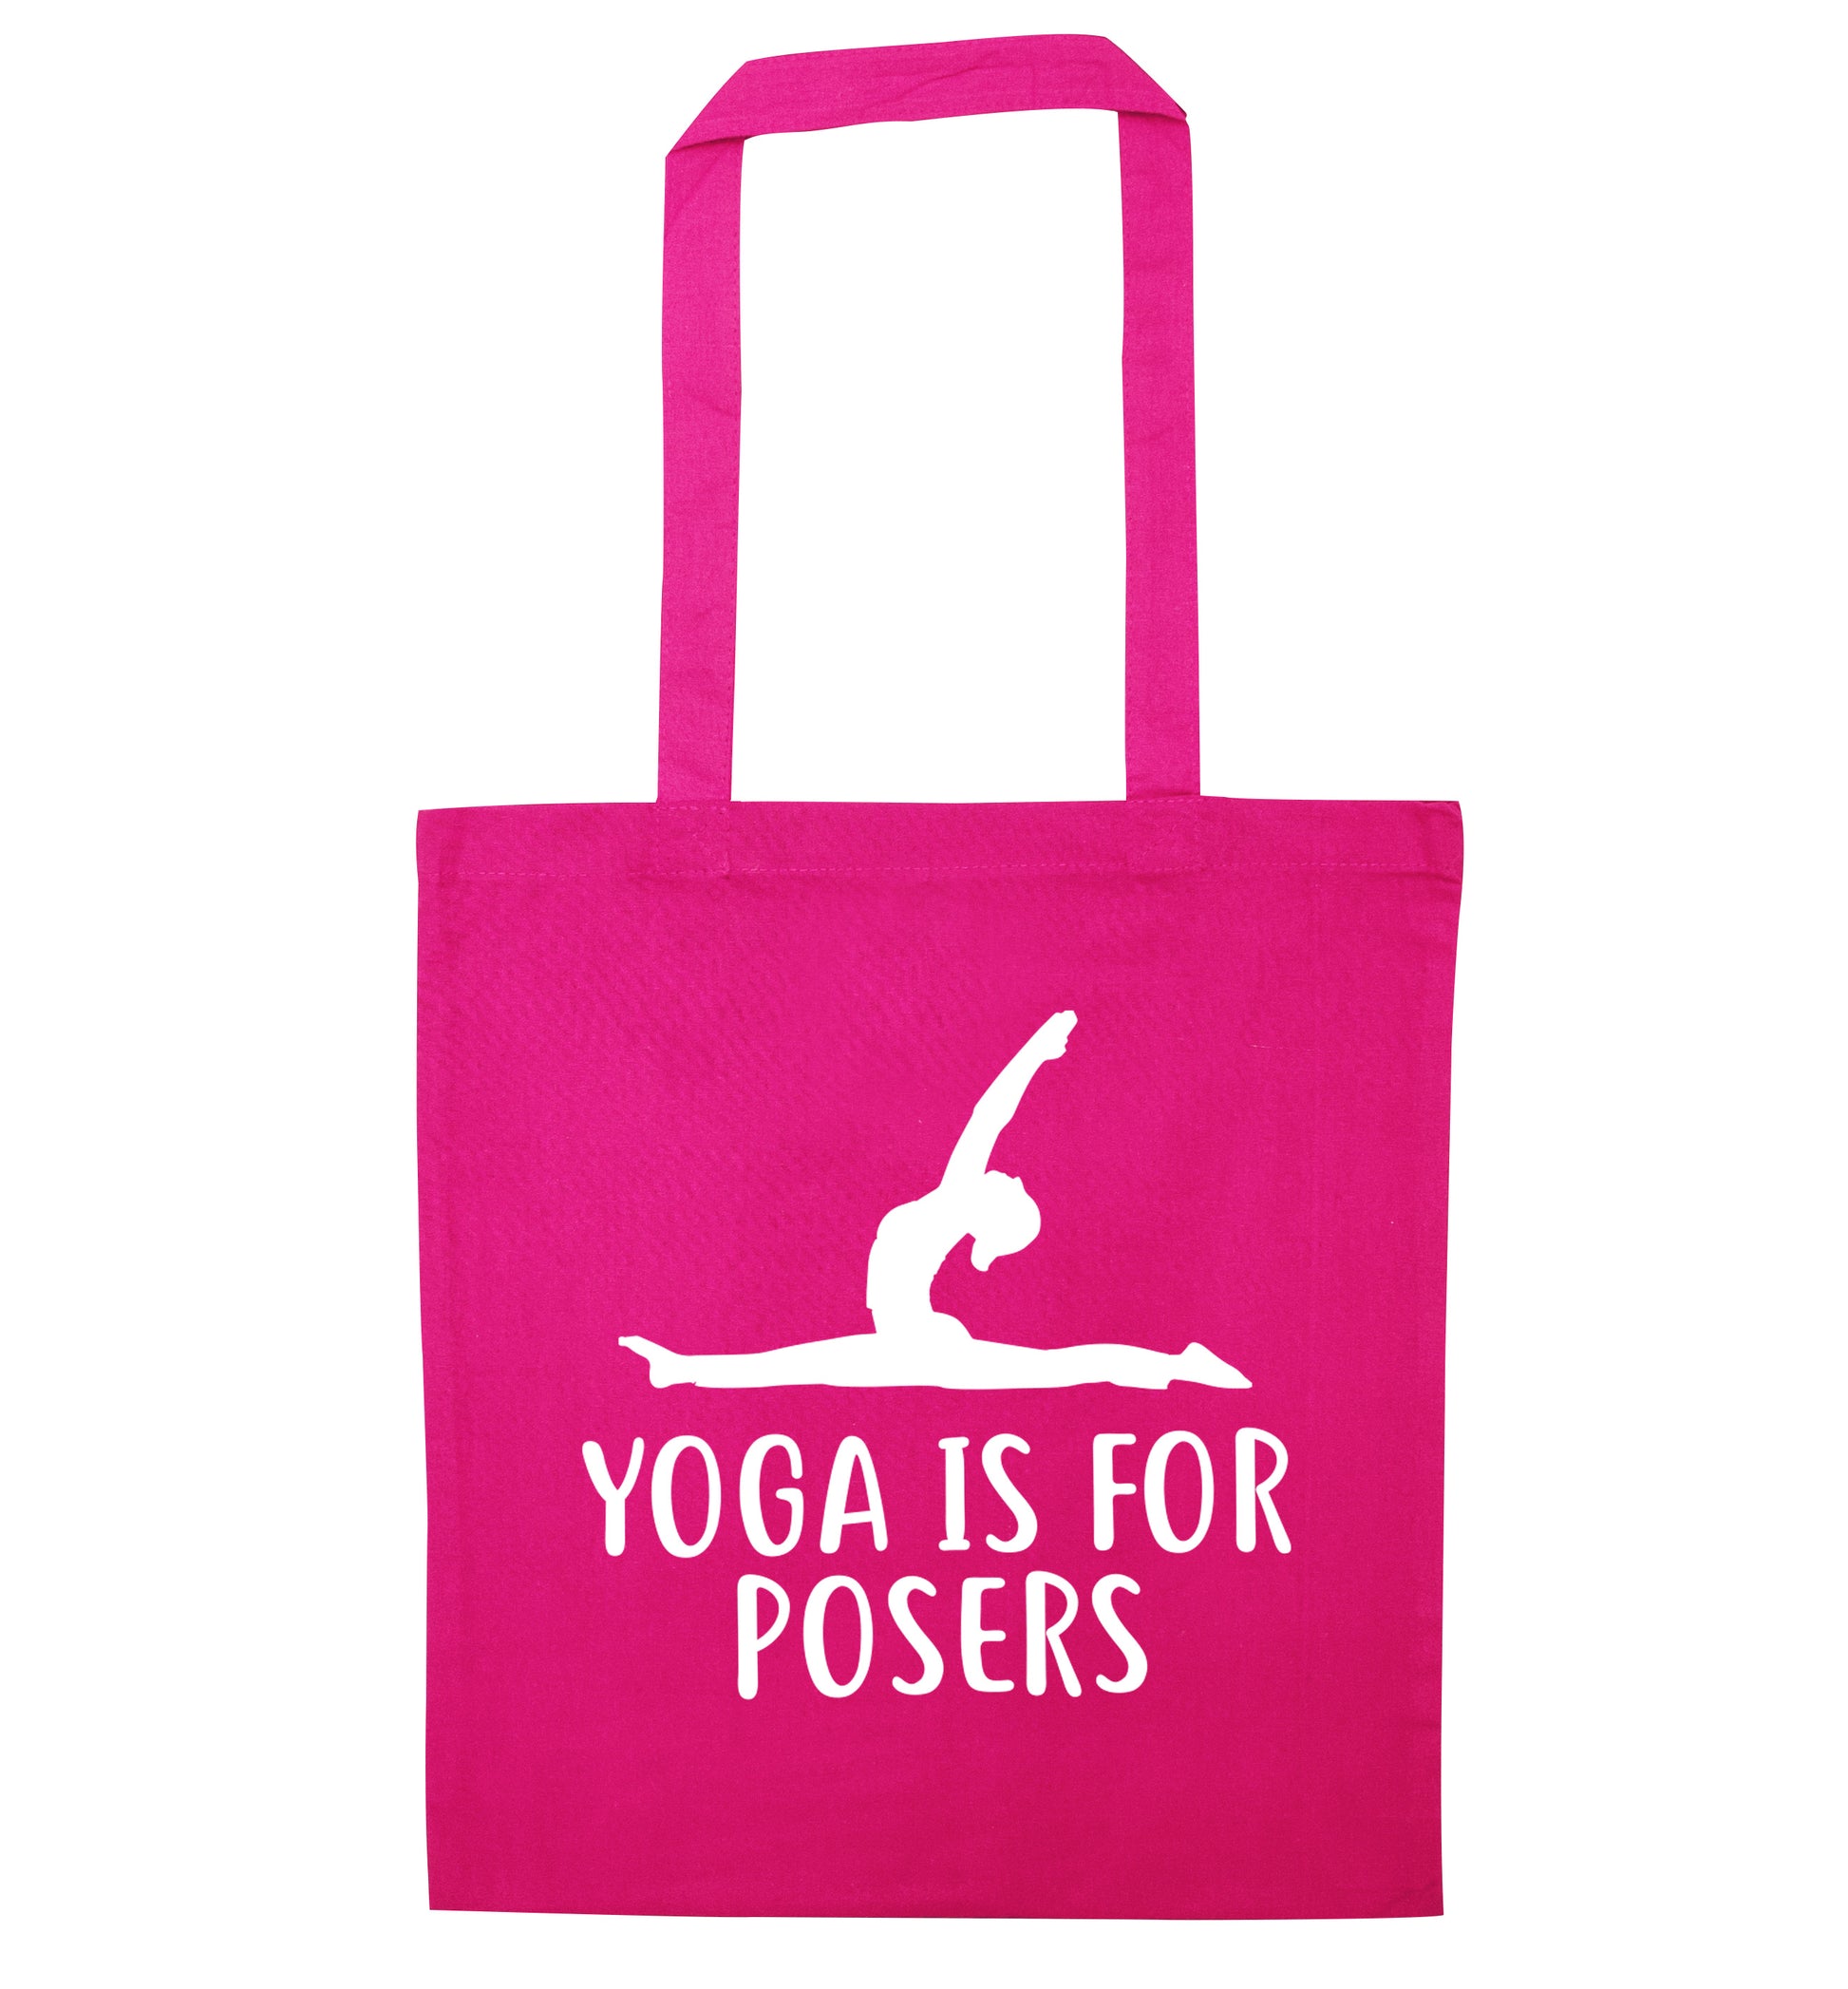 Yoga is for posers pink tote bag